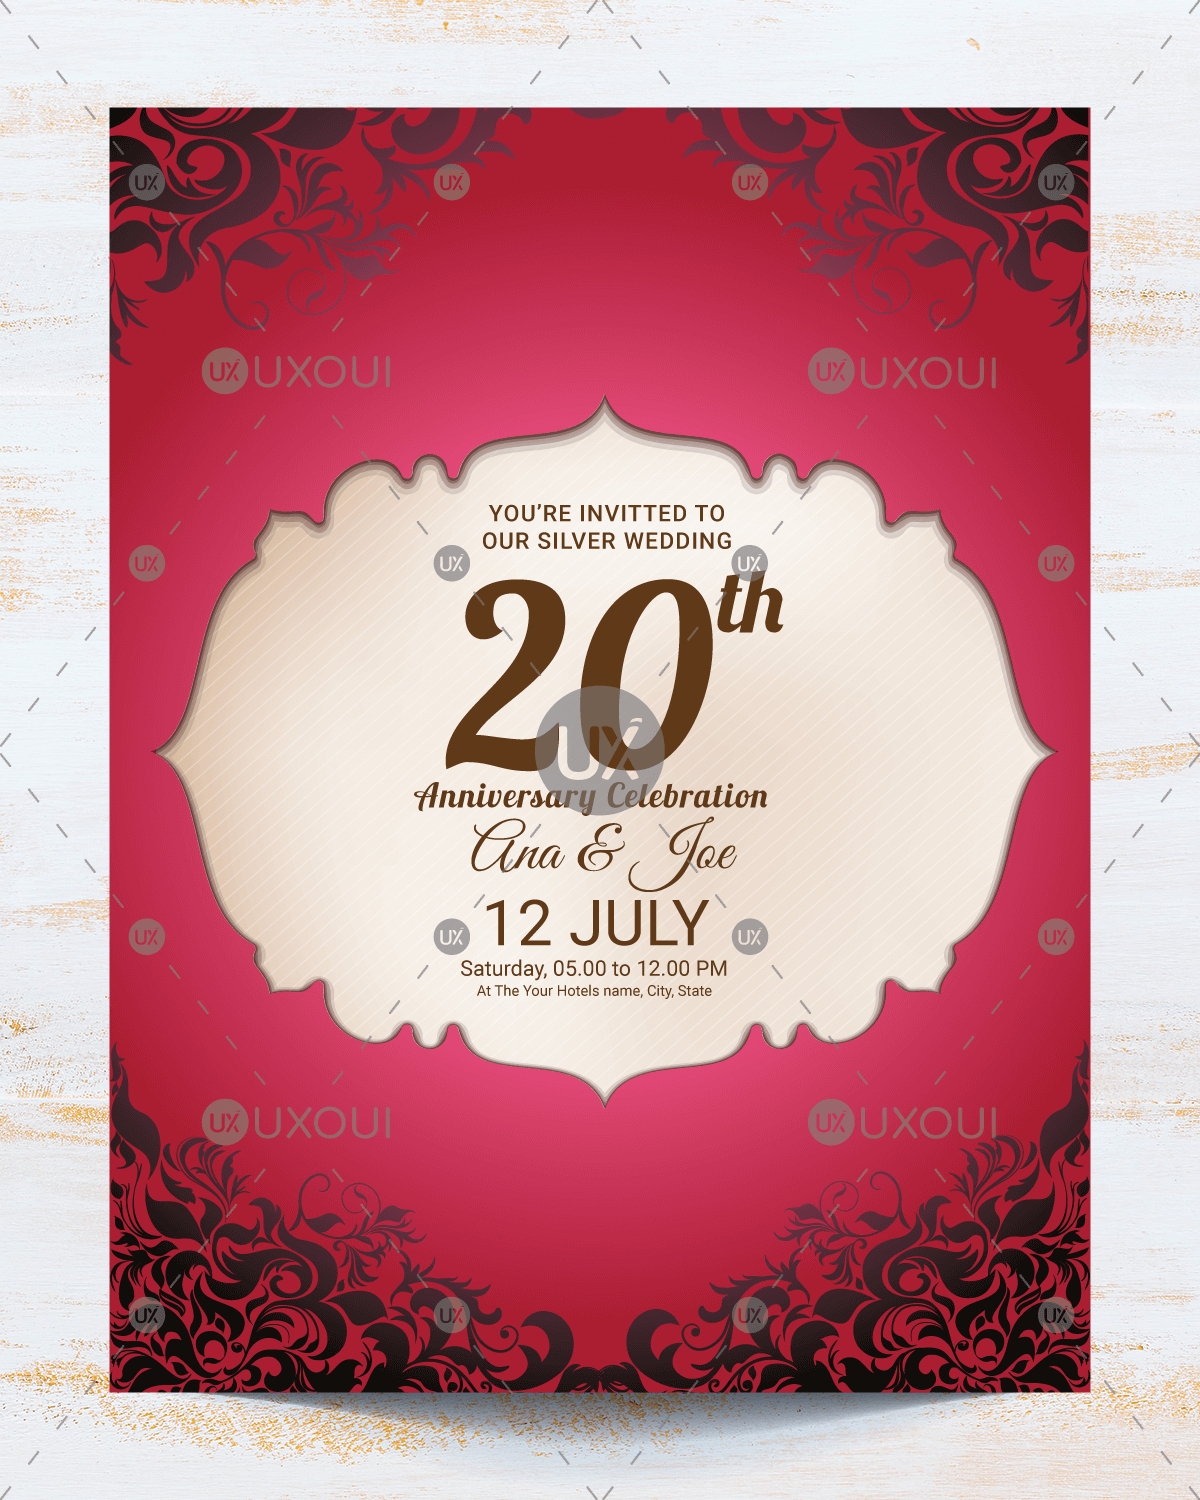 Vintage Wedding Anniversary Invitation Card Template Design Vector In Template For Anniversary Card